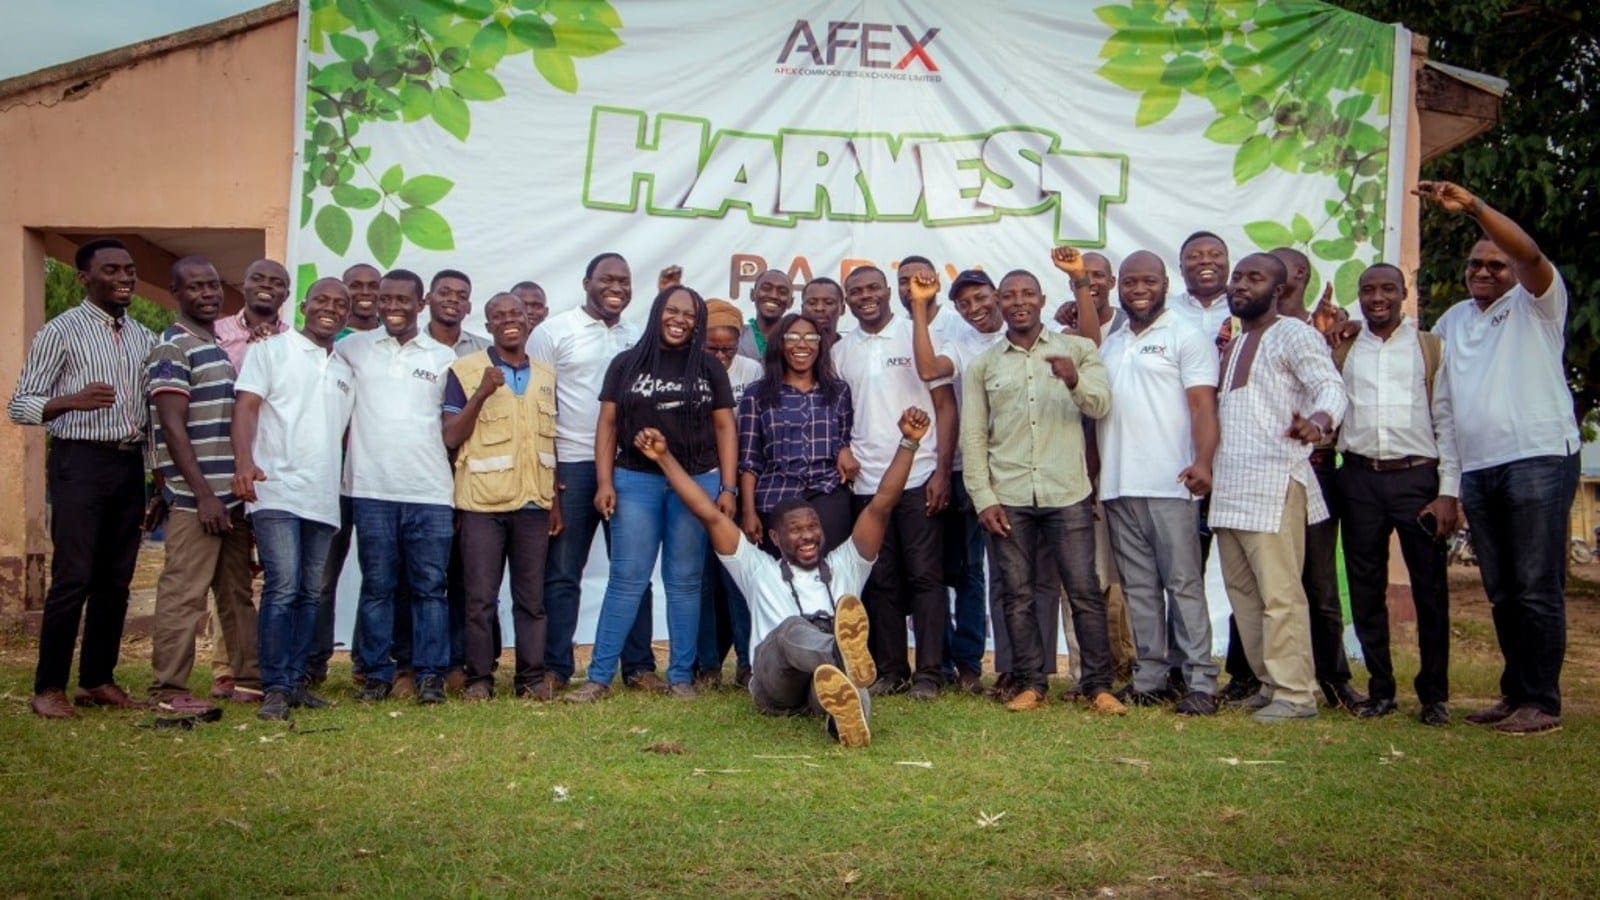 Nigerian commodity trader AFEX proudly supports over 160,000 farmers in the last five years